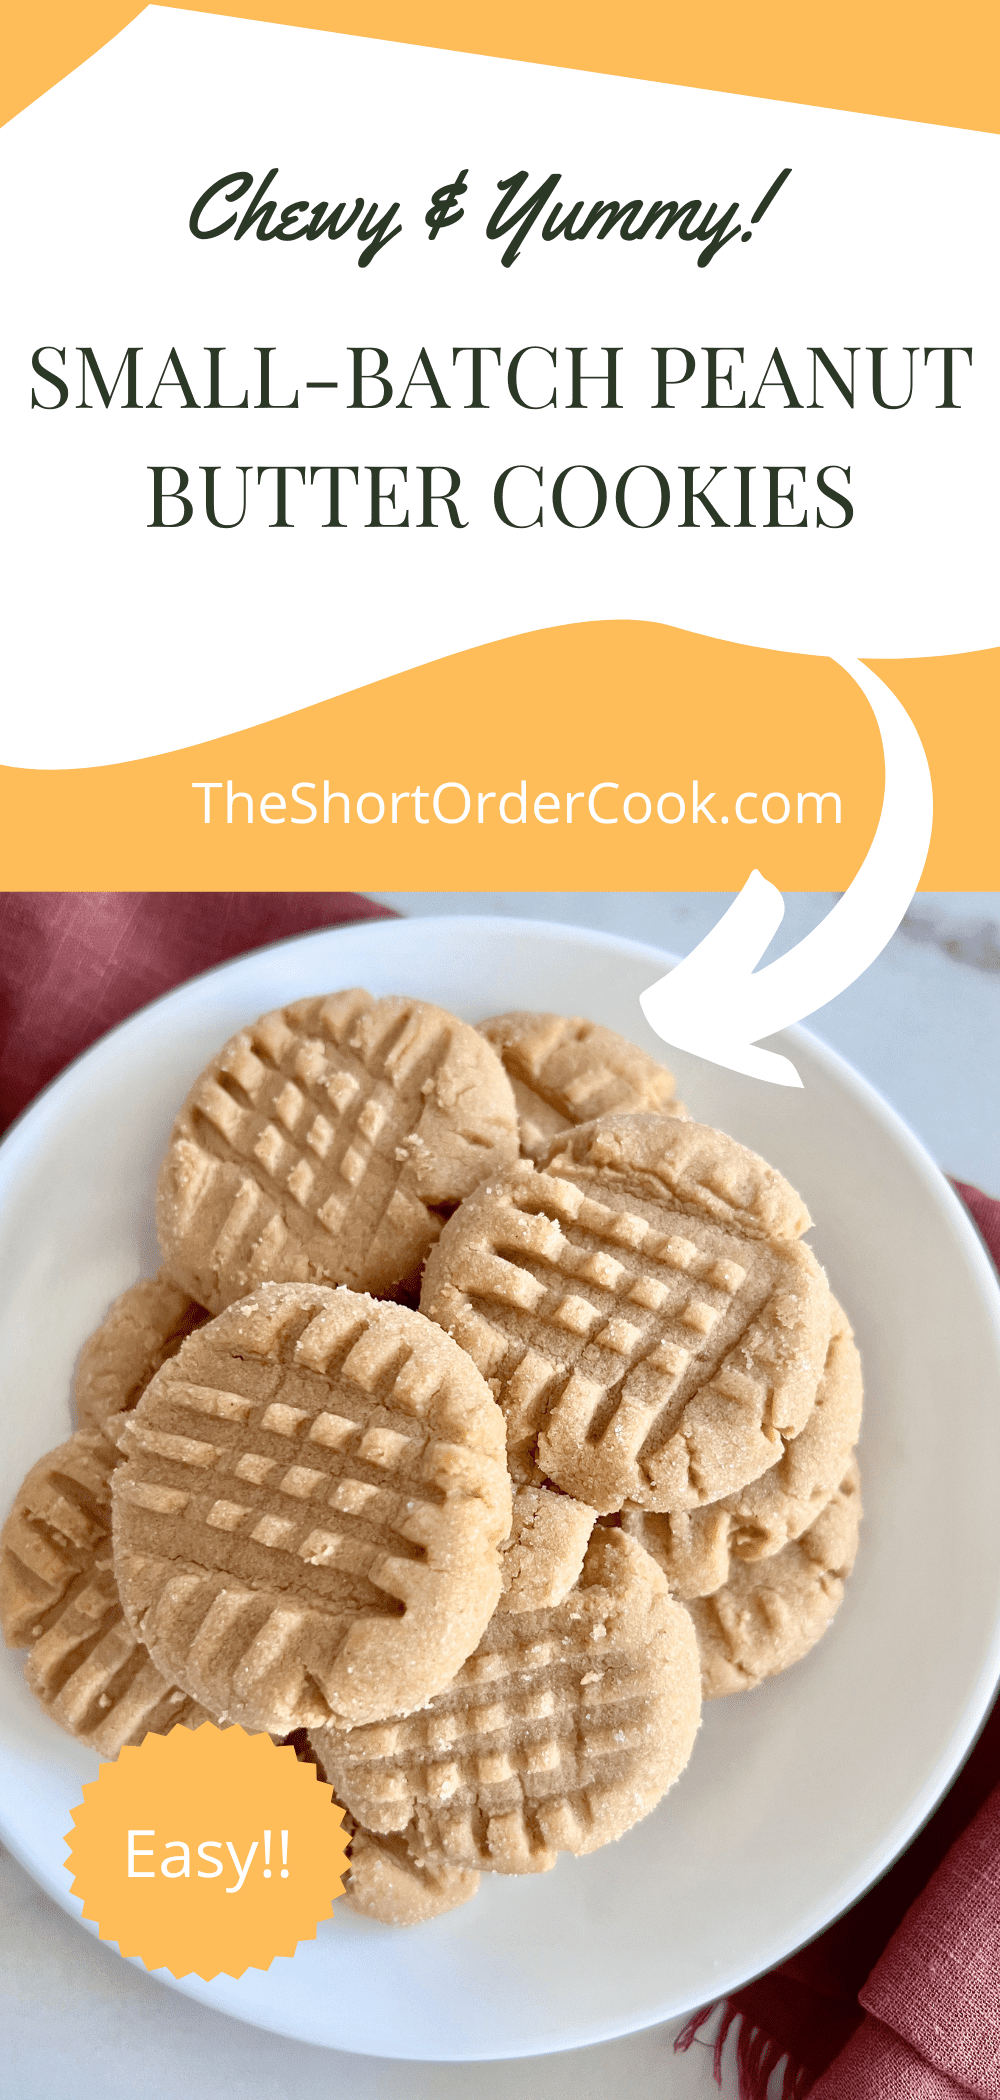 Small-Batch Peanut Butter Cookies overhead of plate piled high.